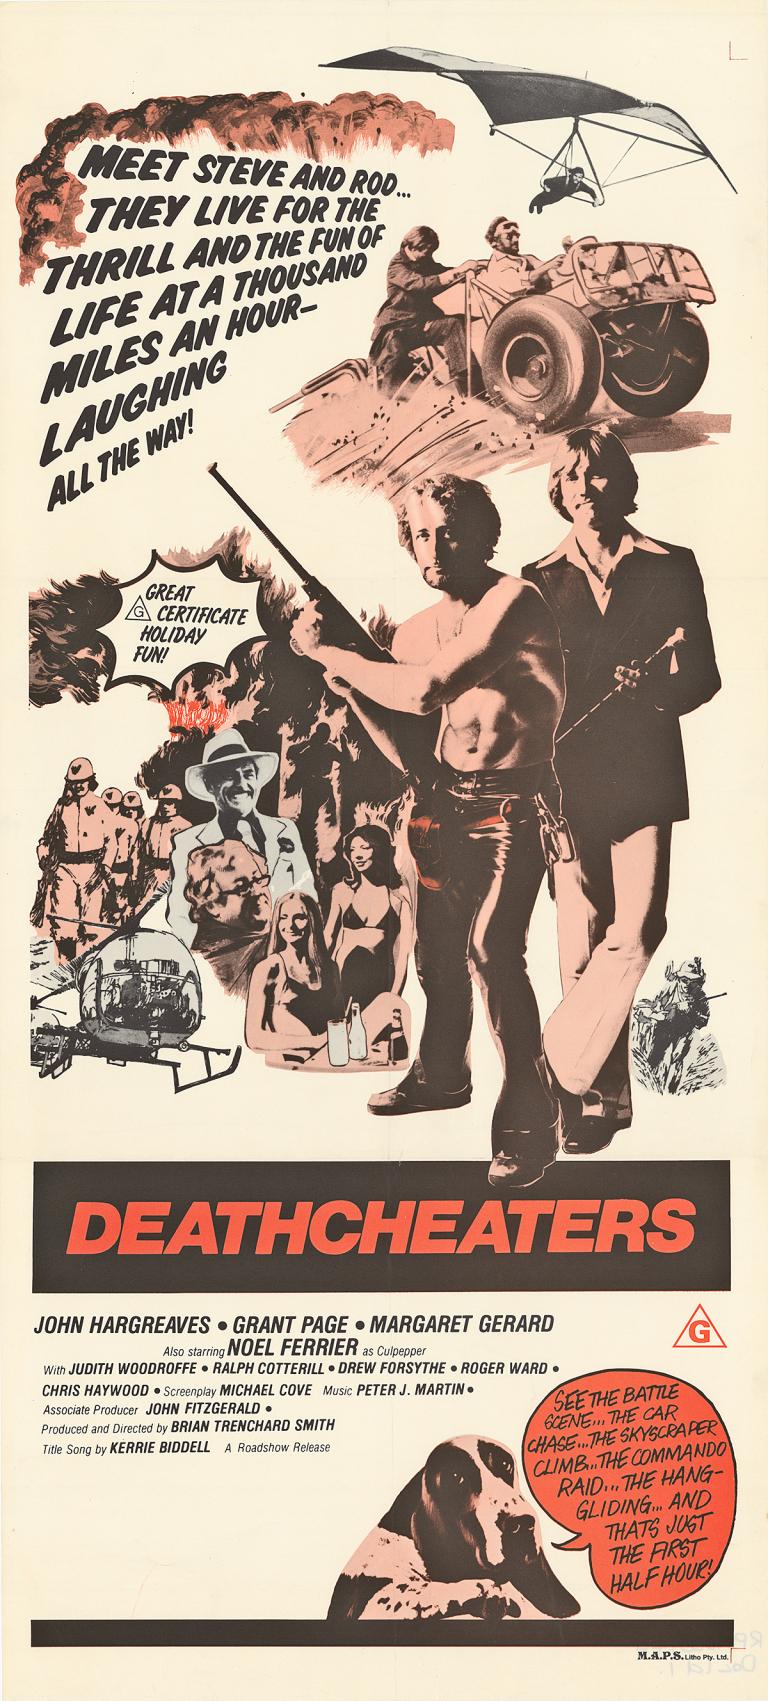 Poster showing men holding weapons, women in bikinis, vehicles, a dog, a helicopter and a hang glider all around the page with writing and film credits scattered among the images.